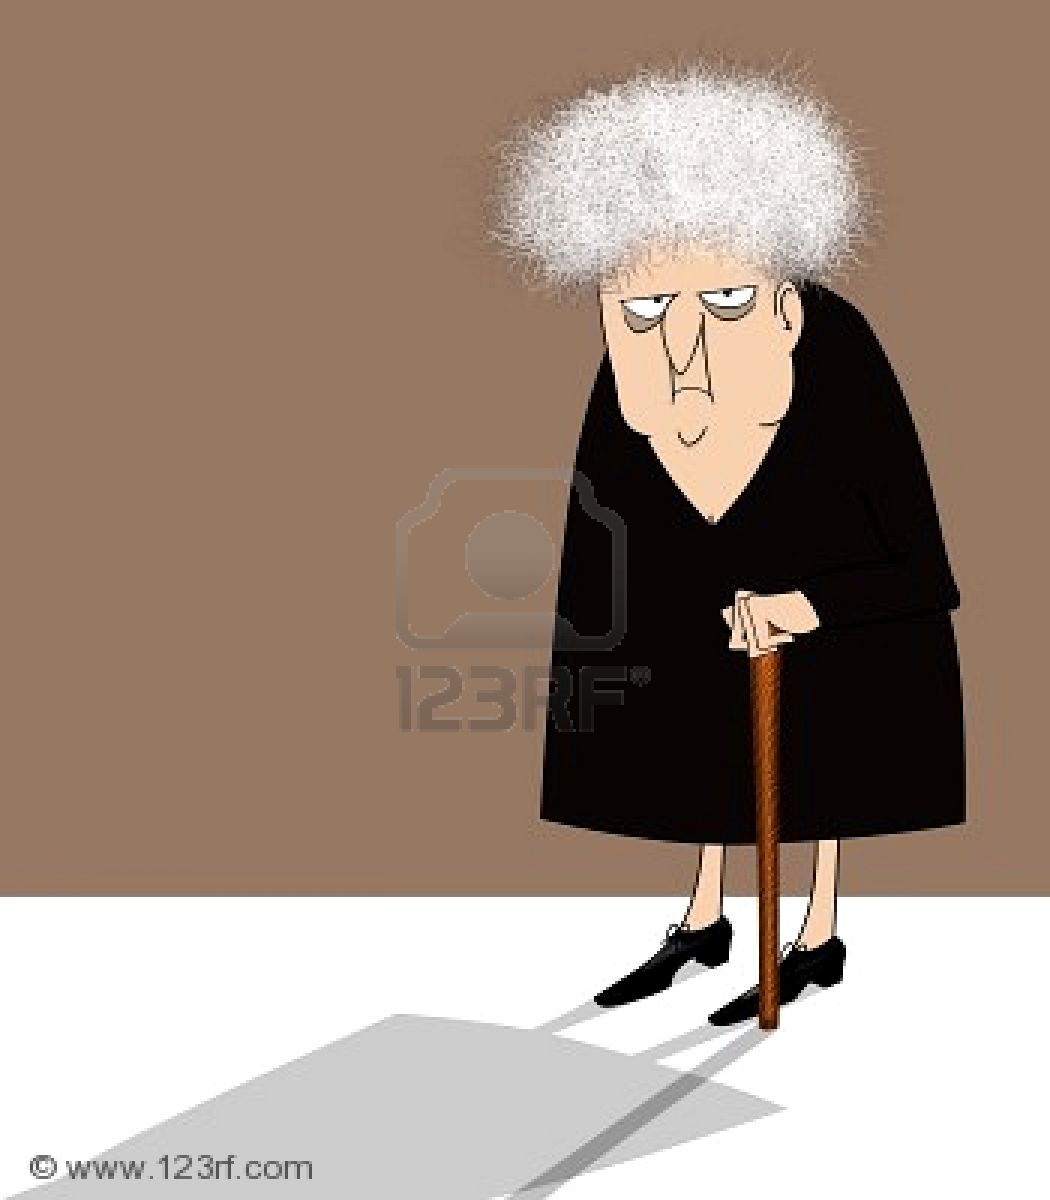 Funny Image Of Old Woman